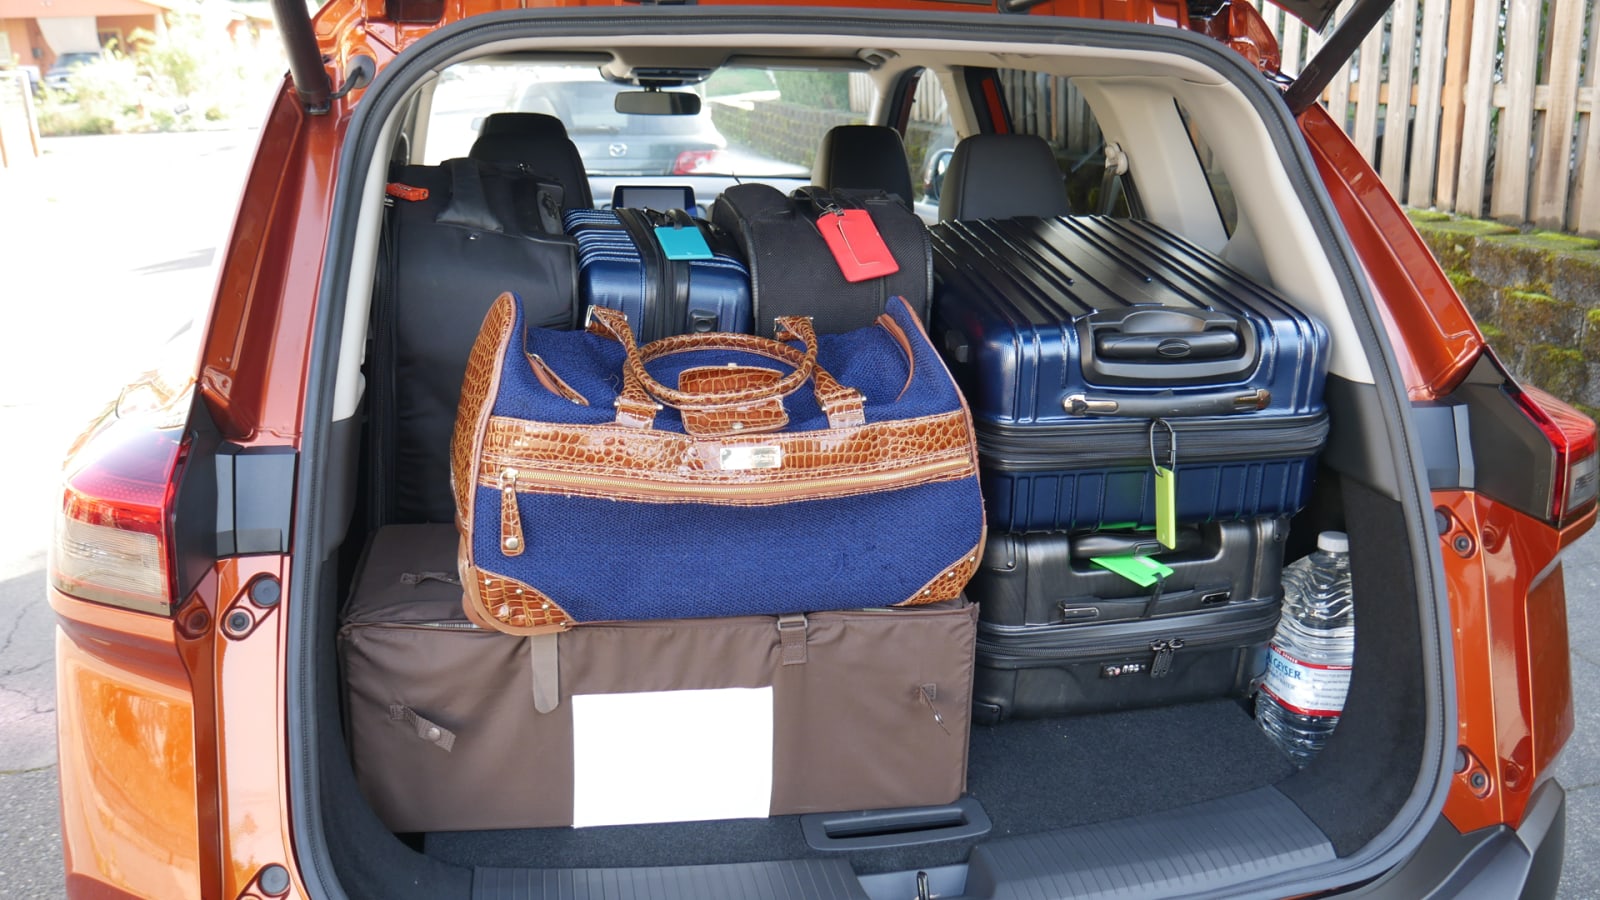 2021 Nissan Rogue Luggage Test How much fits in the cargo area?